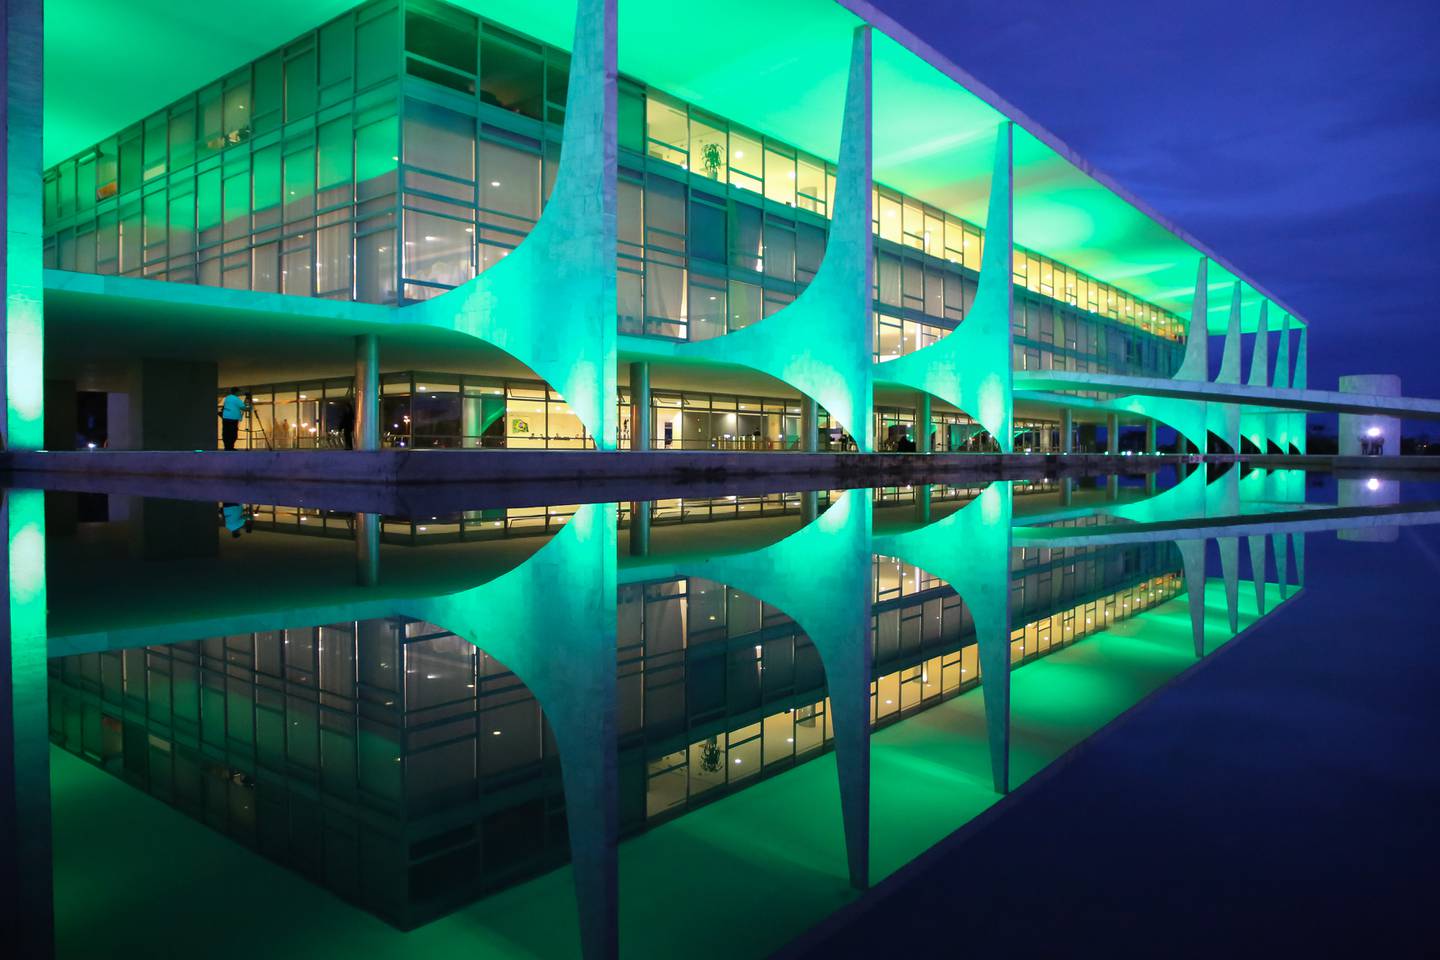 The Planalto Palace, in Brasilia, headquarters of the federal government and one of the stages for the inauguration ceremony next Sunday.